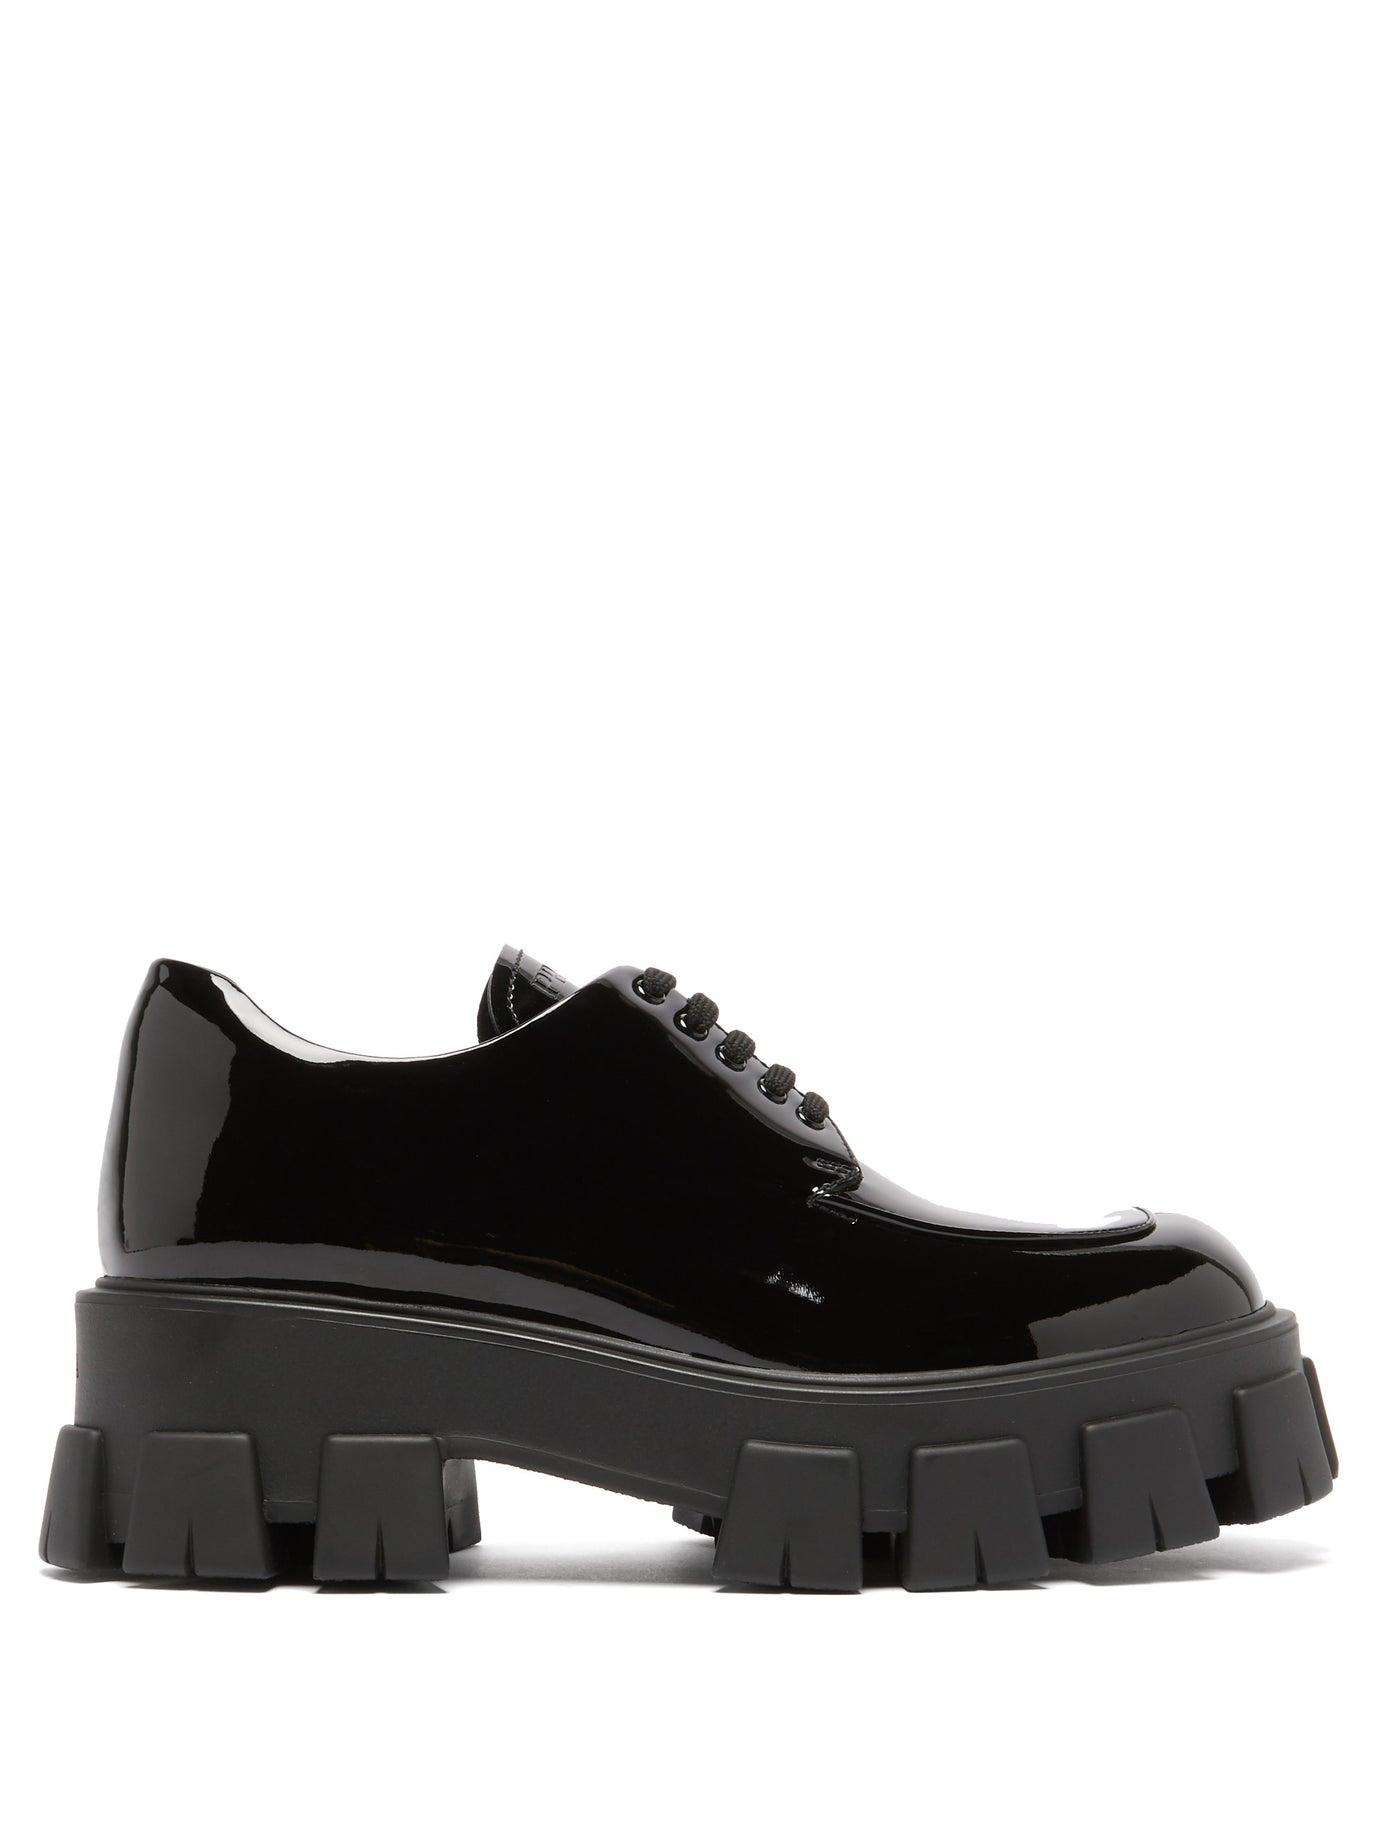 Prada Exaggerated Sole Patent Leather Derby Shoes in Black | Lyst